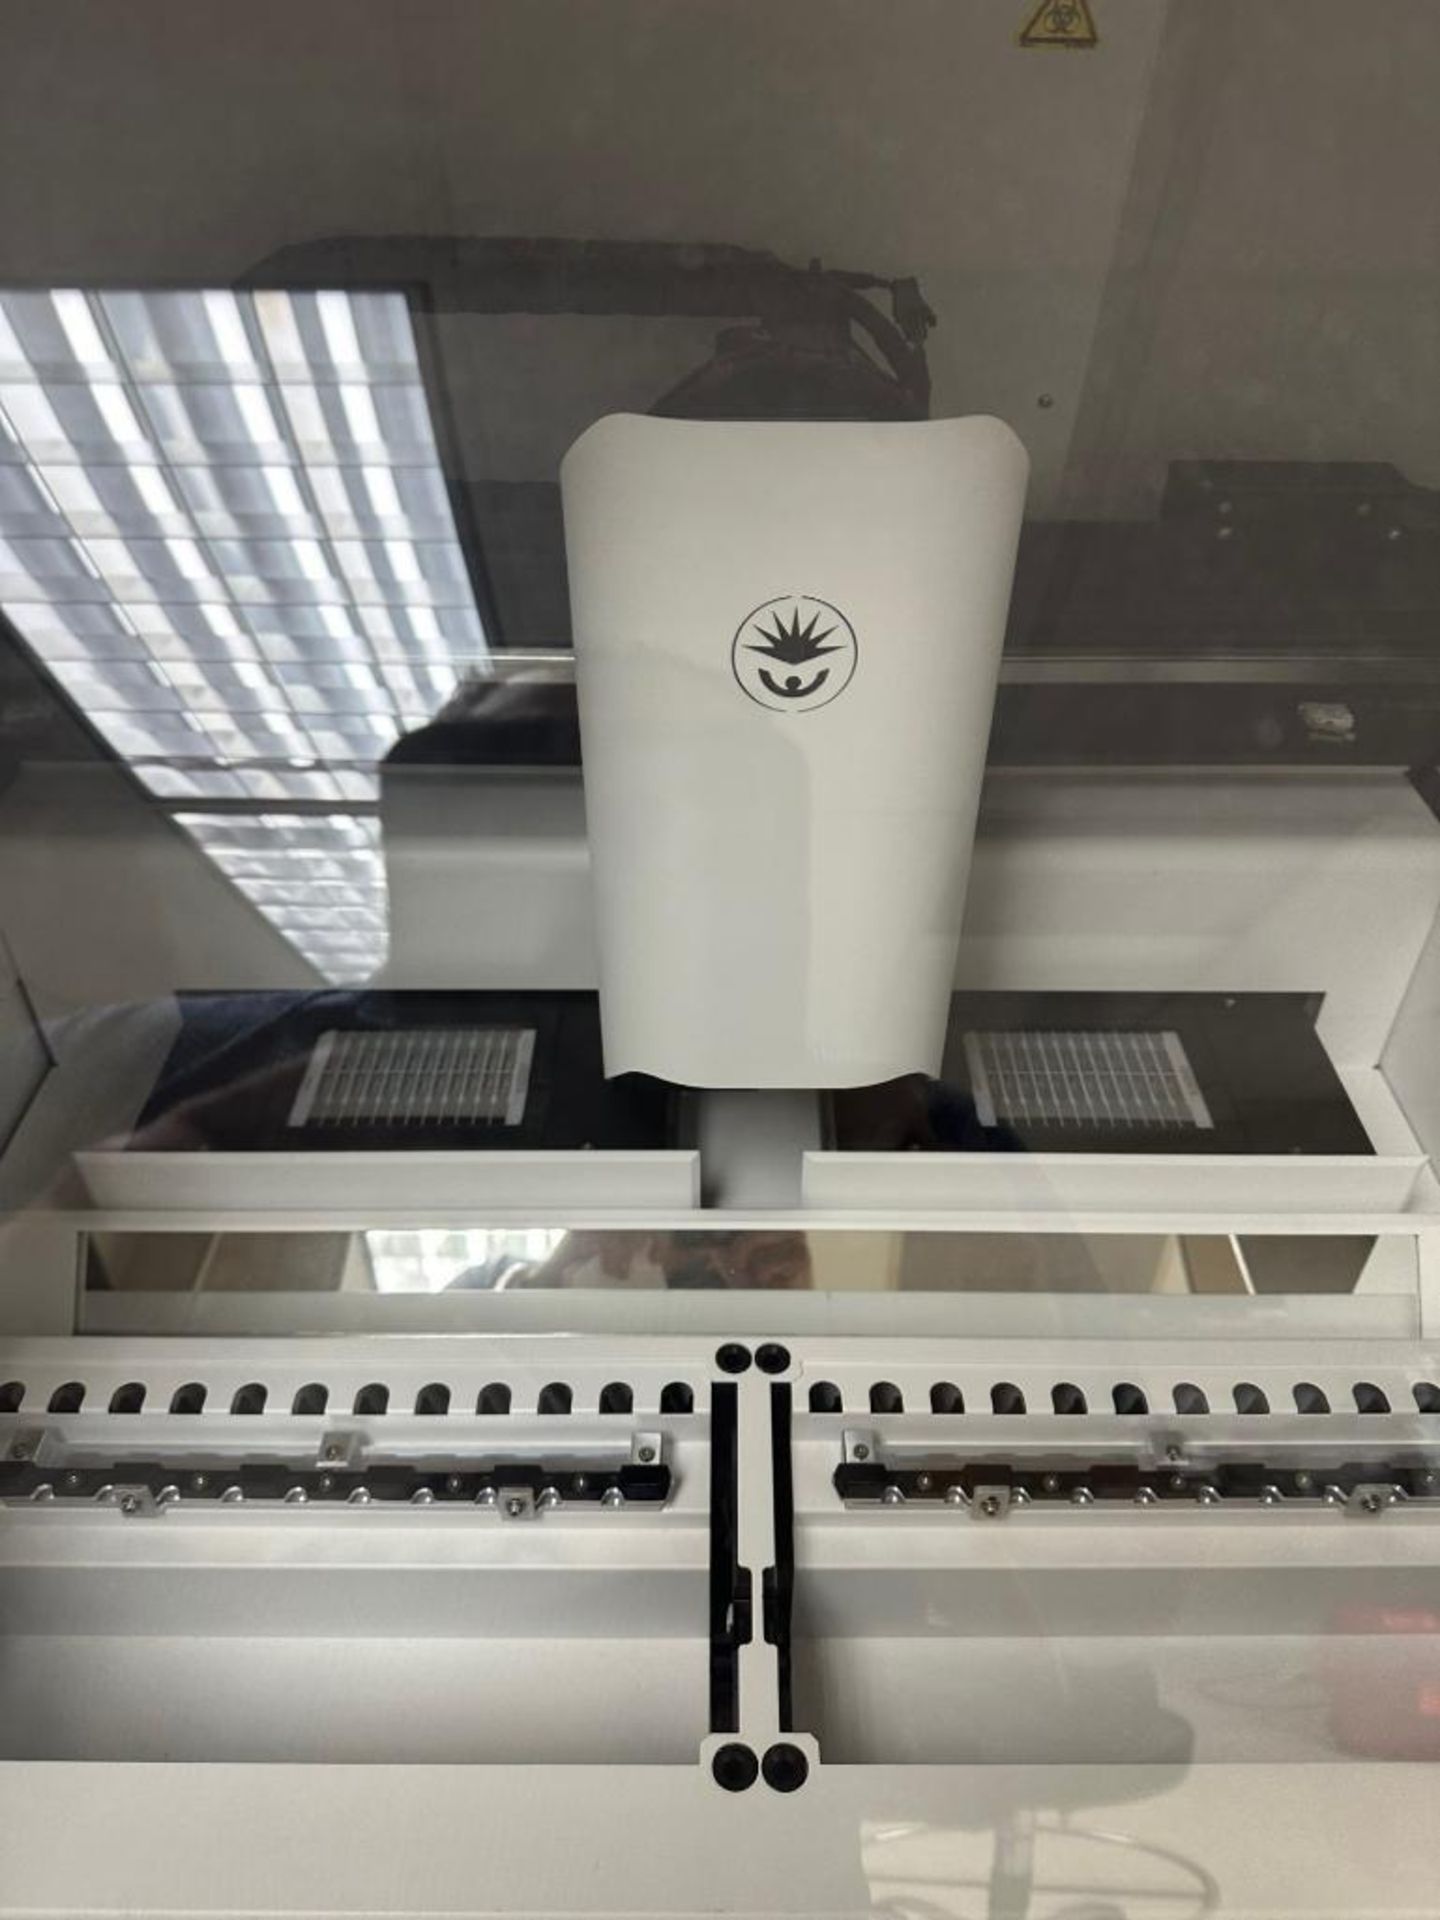 BD MAX MOLECULAR DIAGNOSTIC TESTING SYSTEM; REAL TIME PCR TESTING - Image 4 of 4